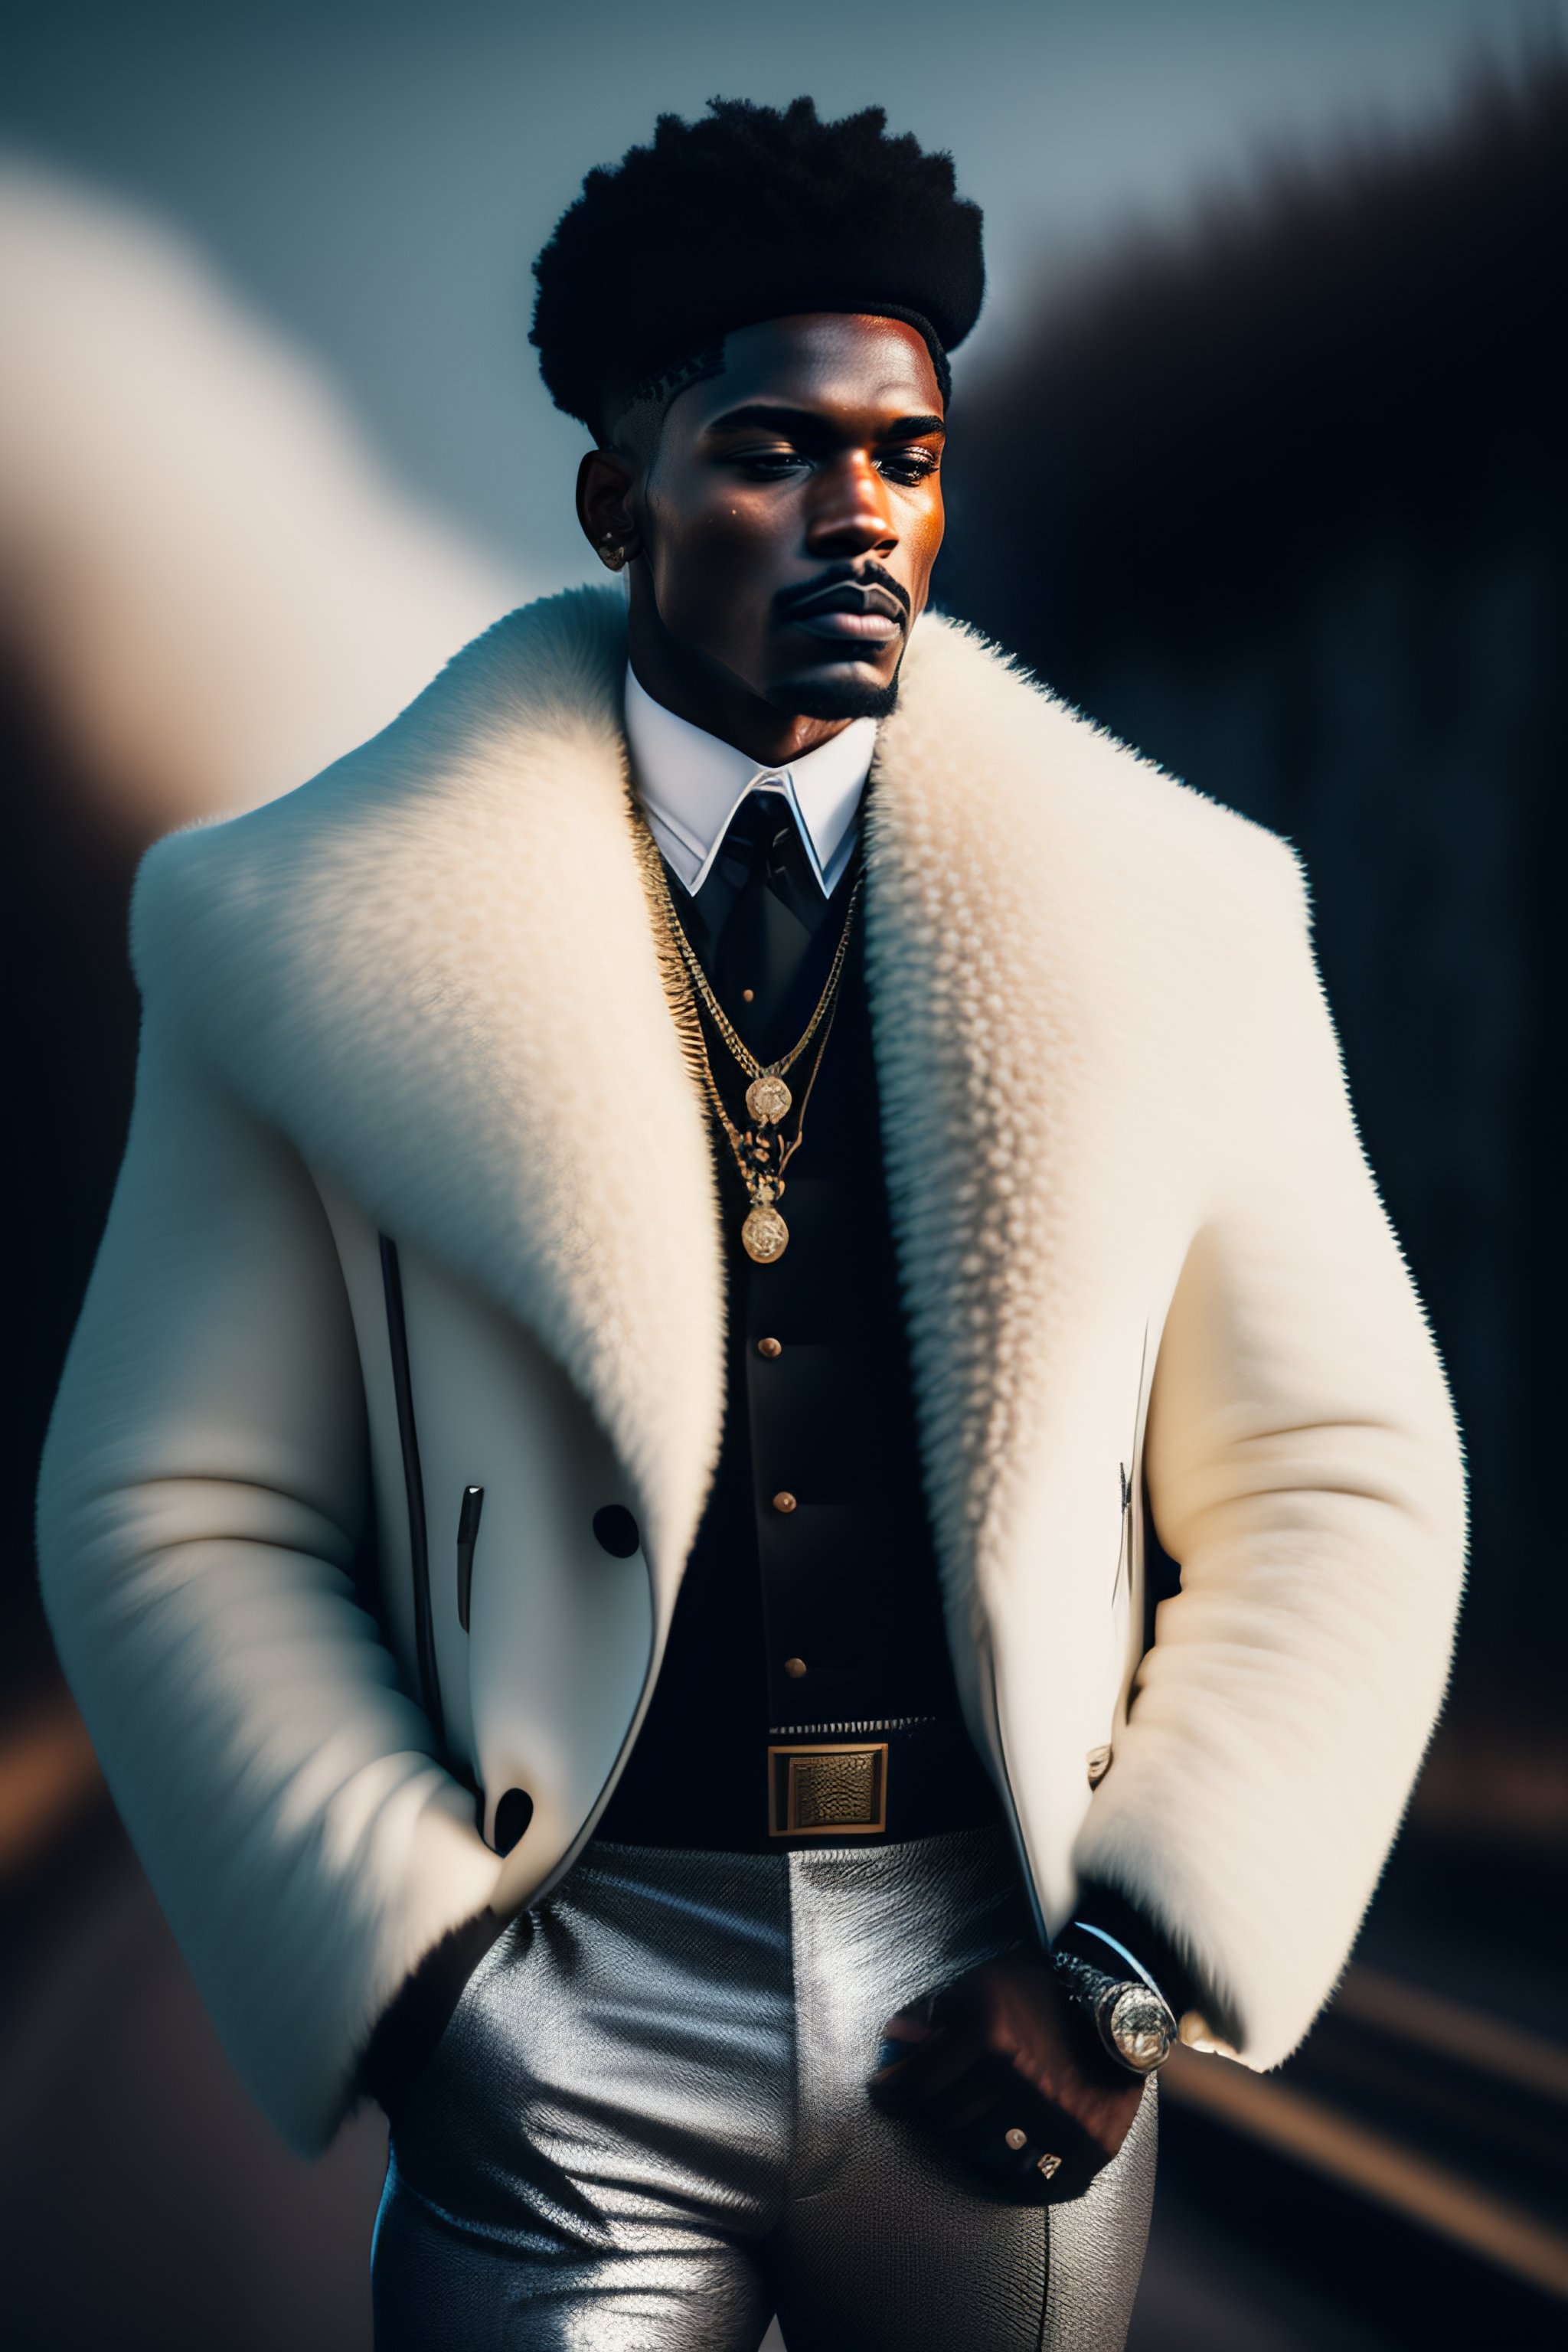 Lexica - A real person in high quality photography picture looking like a  black pimp with black leather clothes and a white fur coat and a big  machin